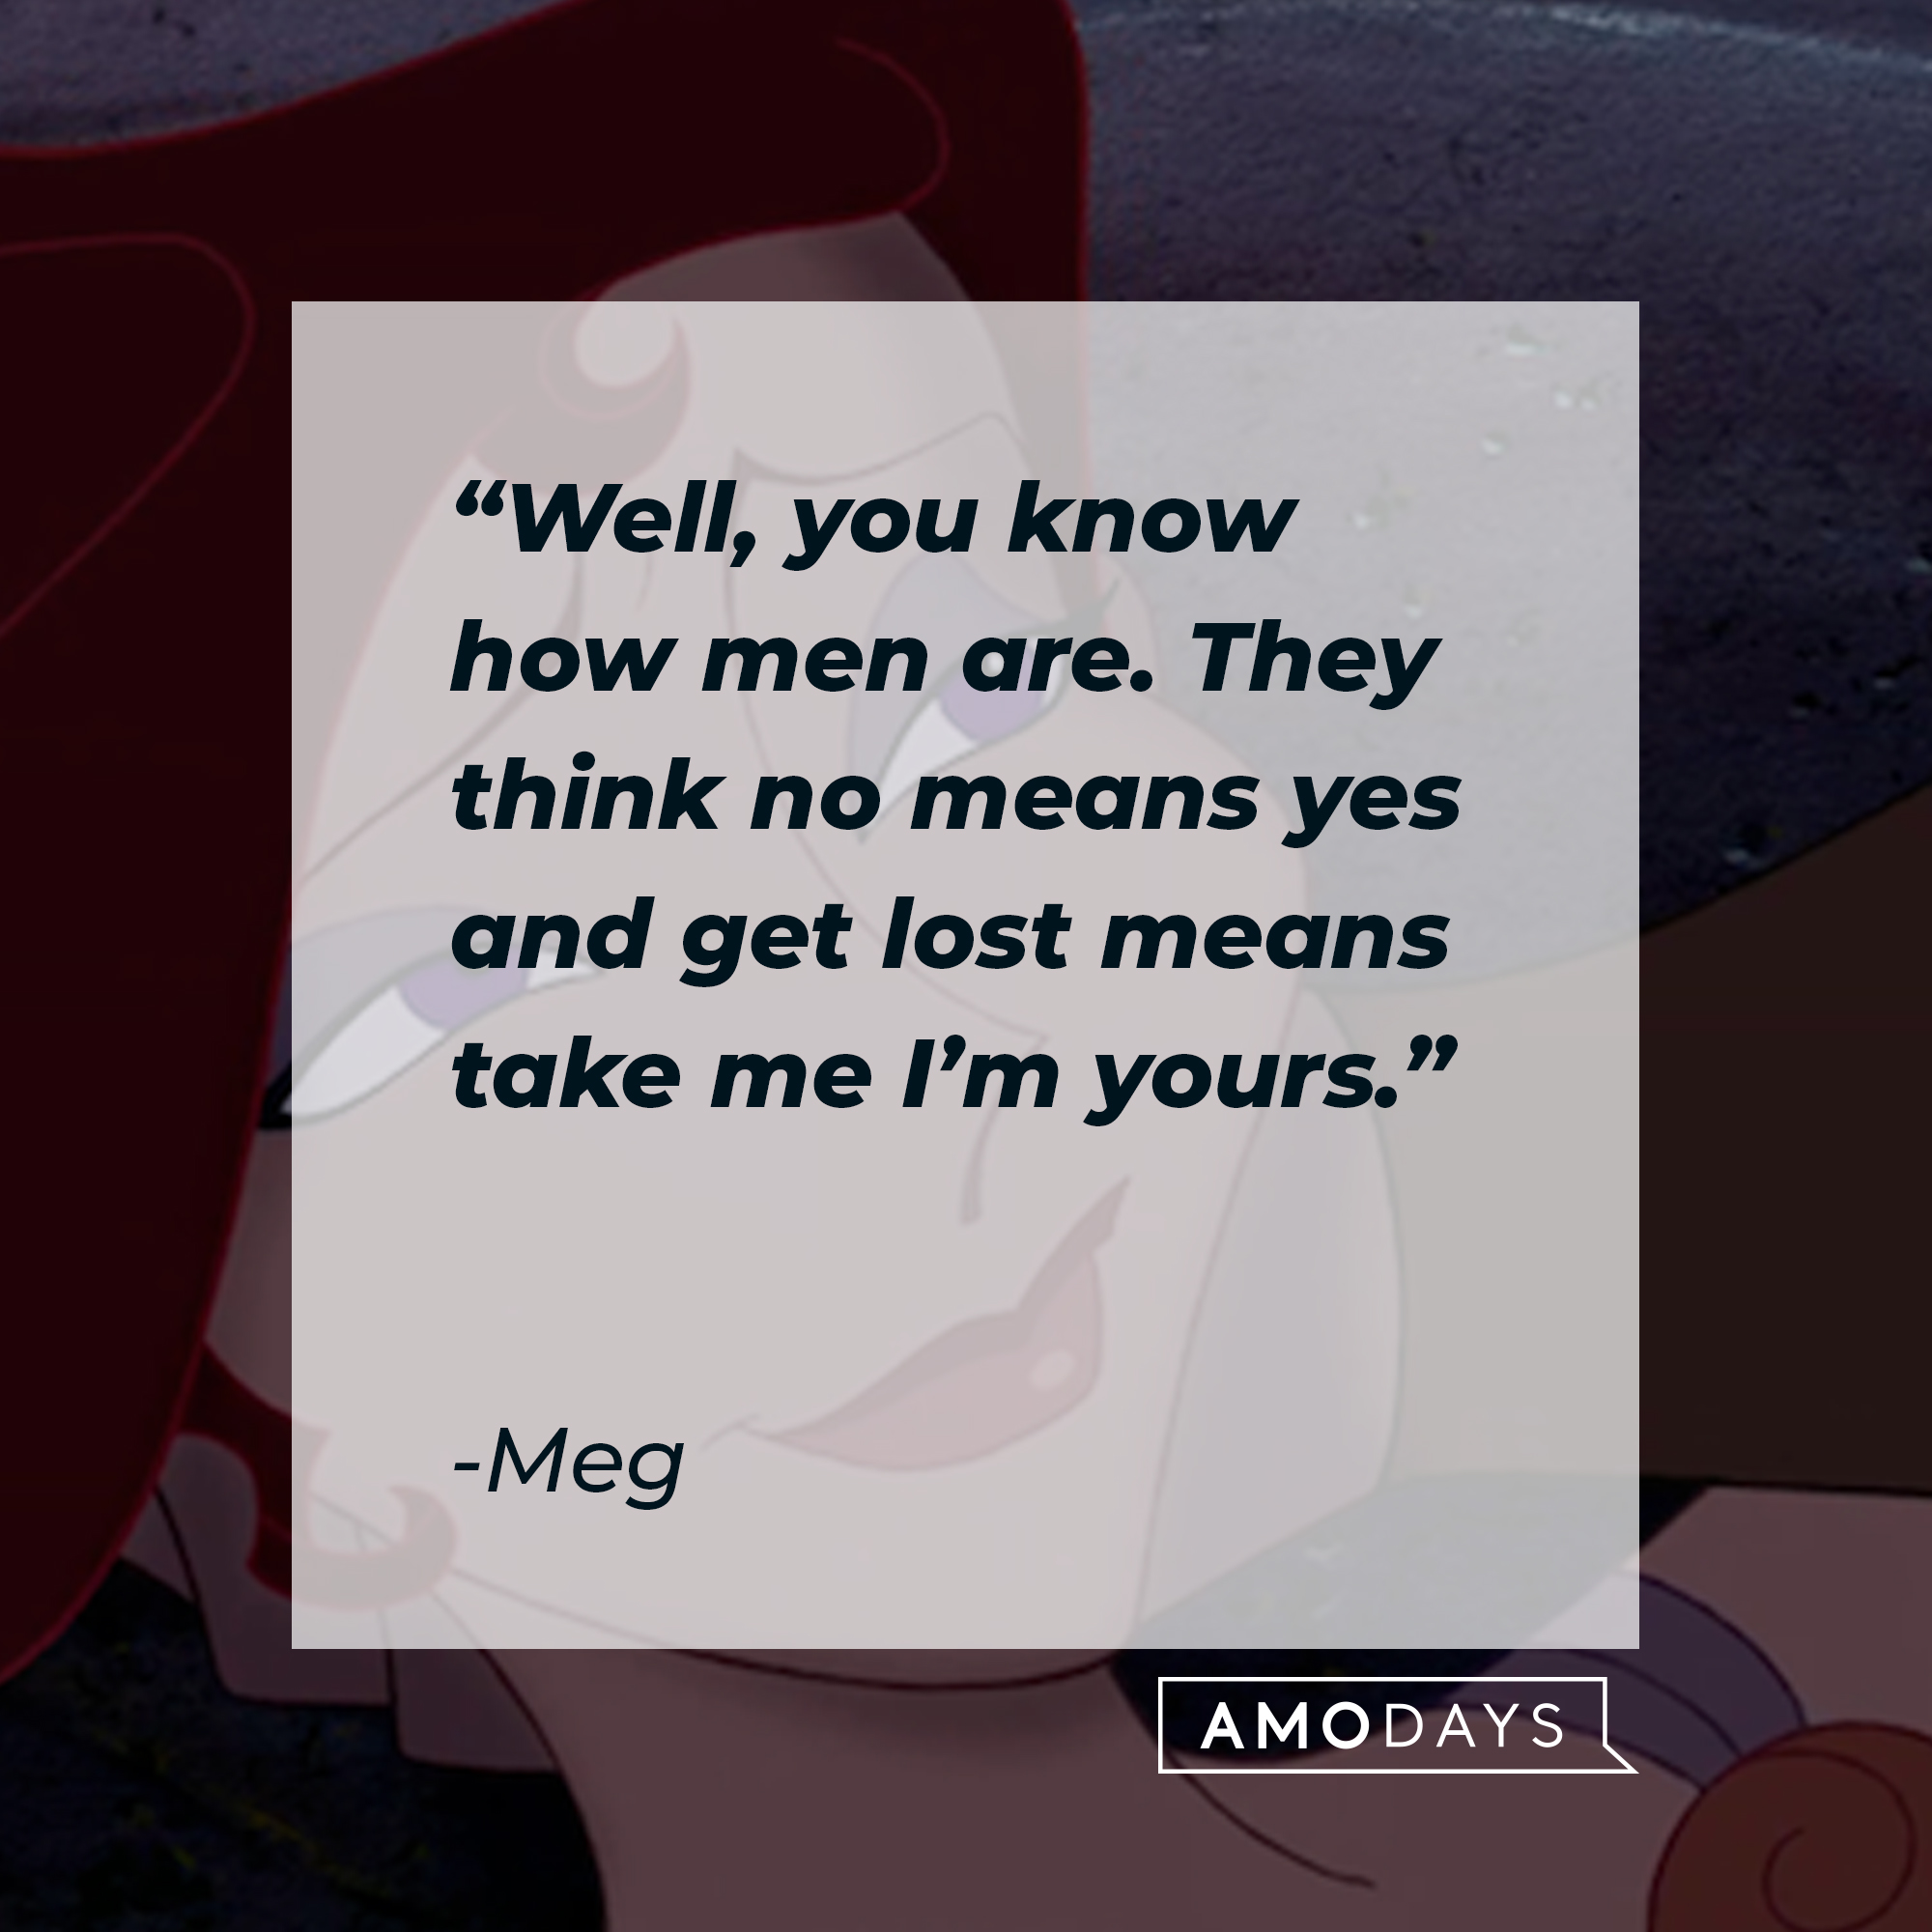 A character from "Hercules" with Meg’s quote: “Well, you know how men are. They think no means yes and get lost means take me I’m yours.” | Source: Facebook.com/DisneyHercules